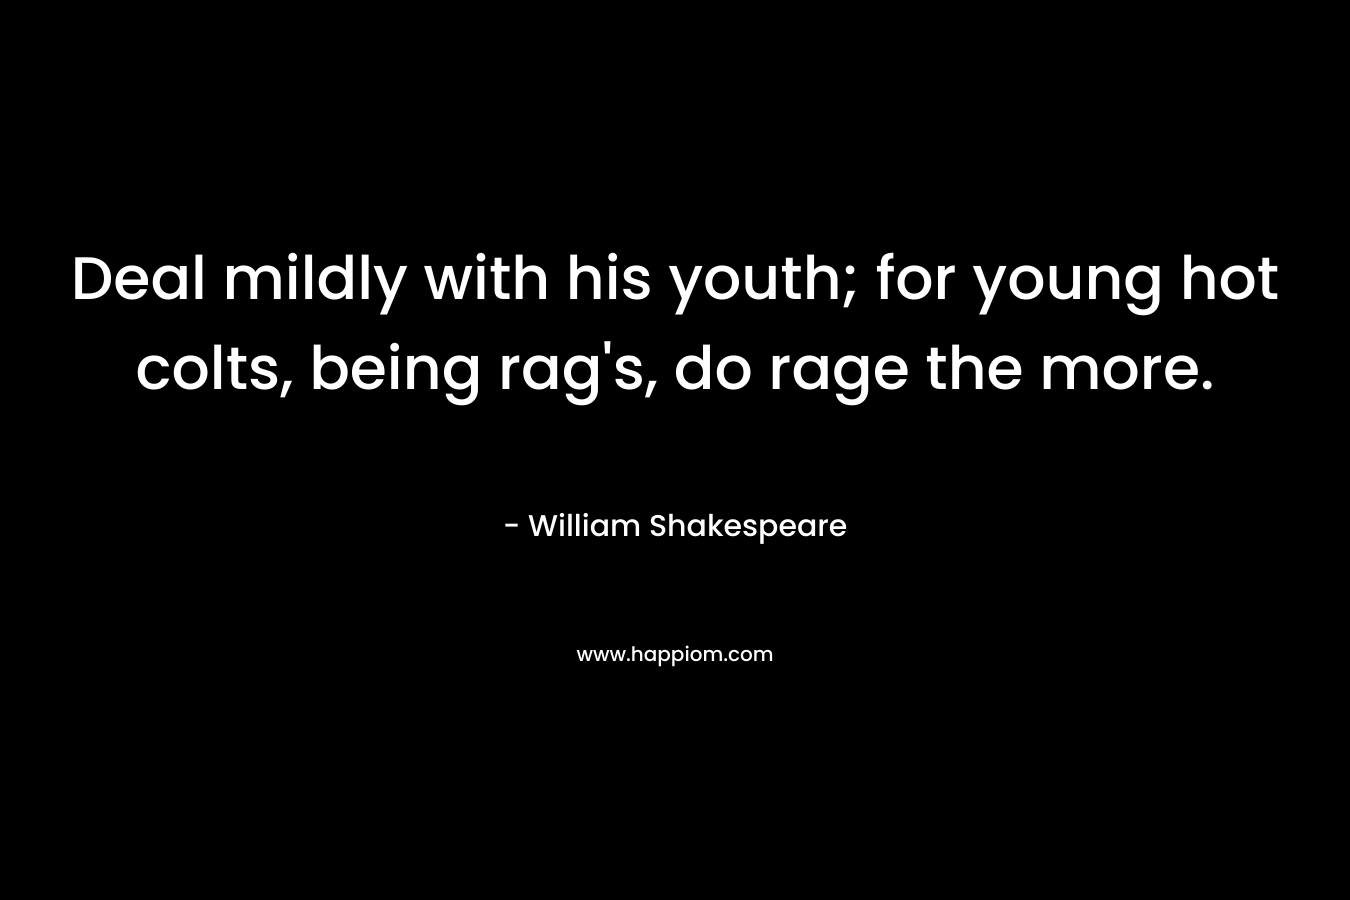 Deal mildly with his youth; for young hot colts, being rag’s, do rage the more. – William Shakespeare